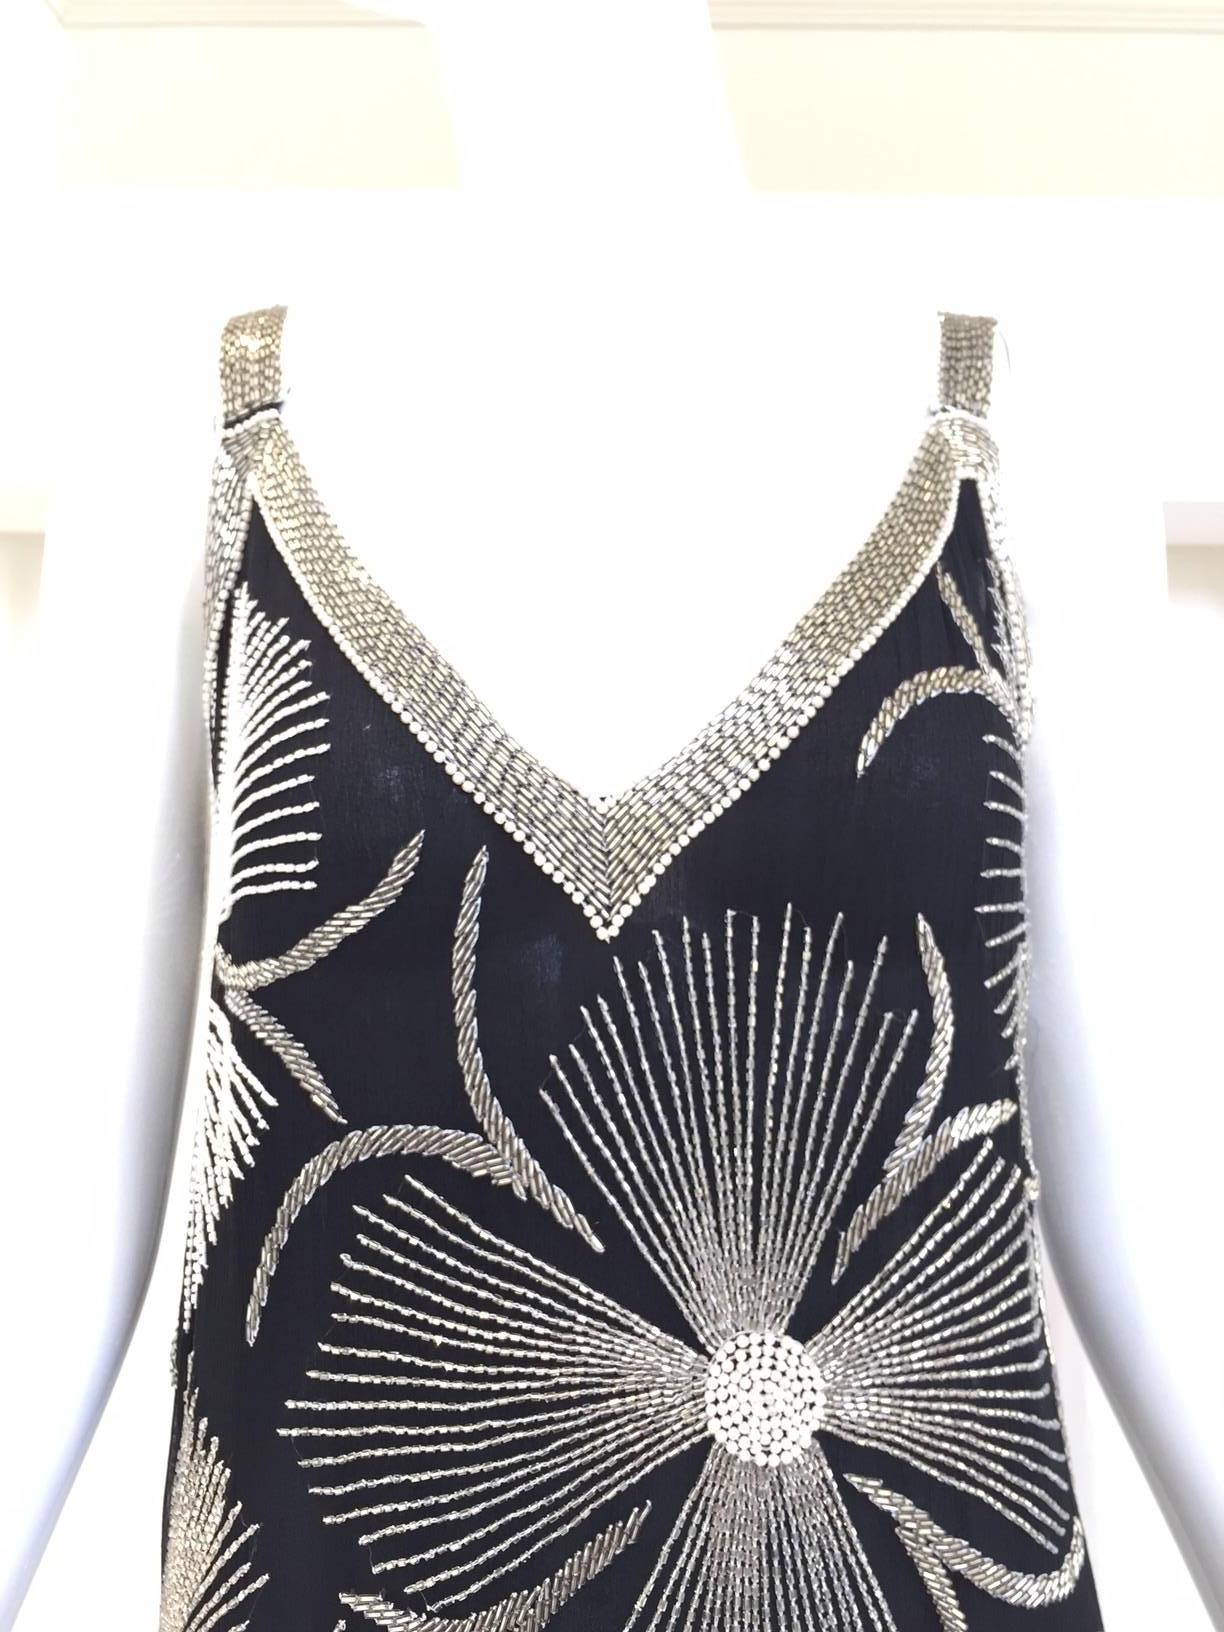 1980s Vintage Black and White Floral Silver Beads Flapper Style spaghetti strap Dress. 
Dress in excellent condition. Fit Size Small - Medium ( 2/4/6)
Bust: 36